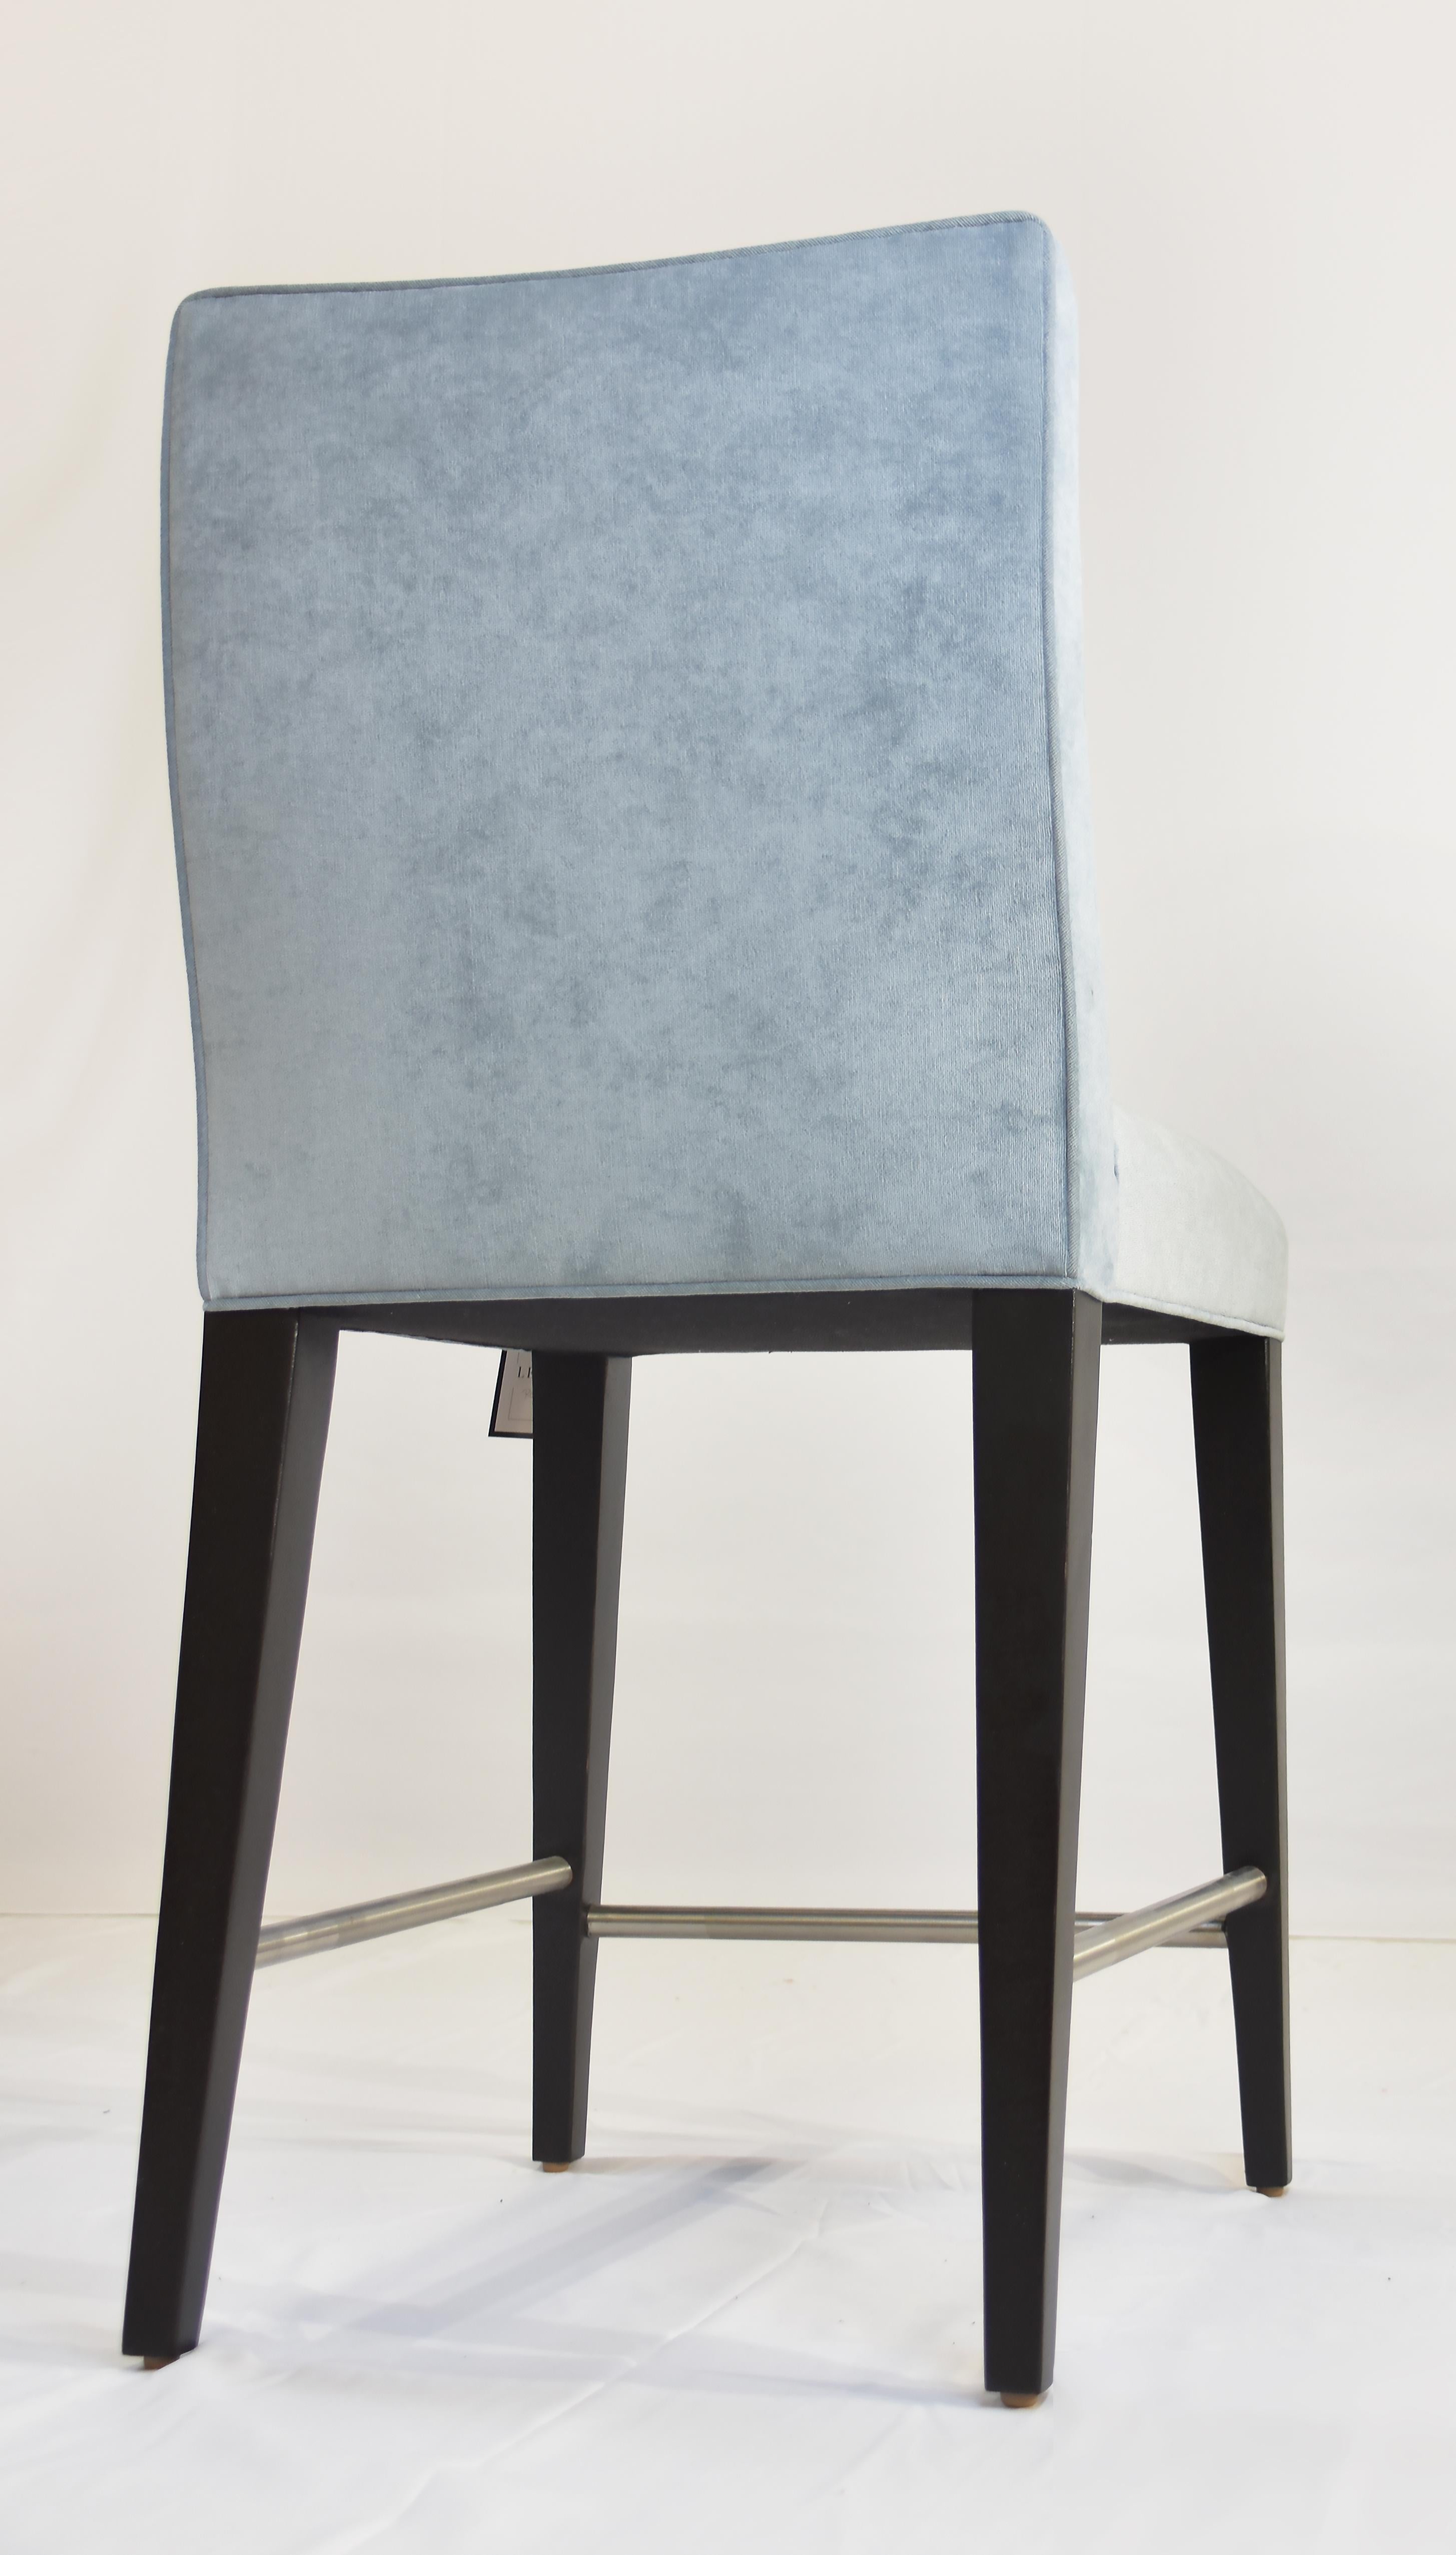 Le Jeune Upholstery Regal Counter Stool Showroom Model In Good Condition For Sale In Miami, FL